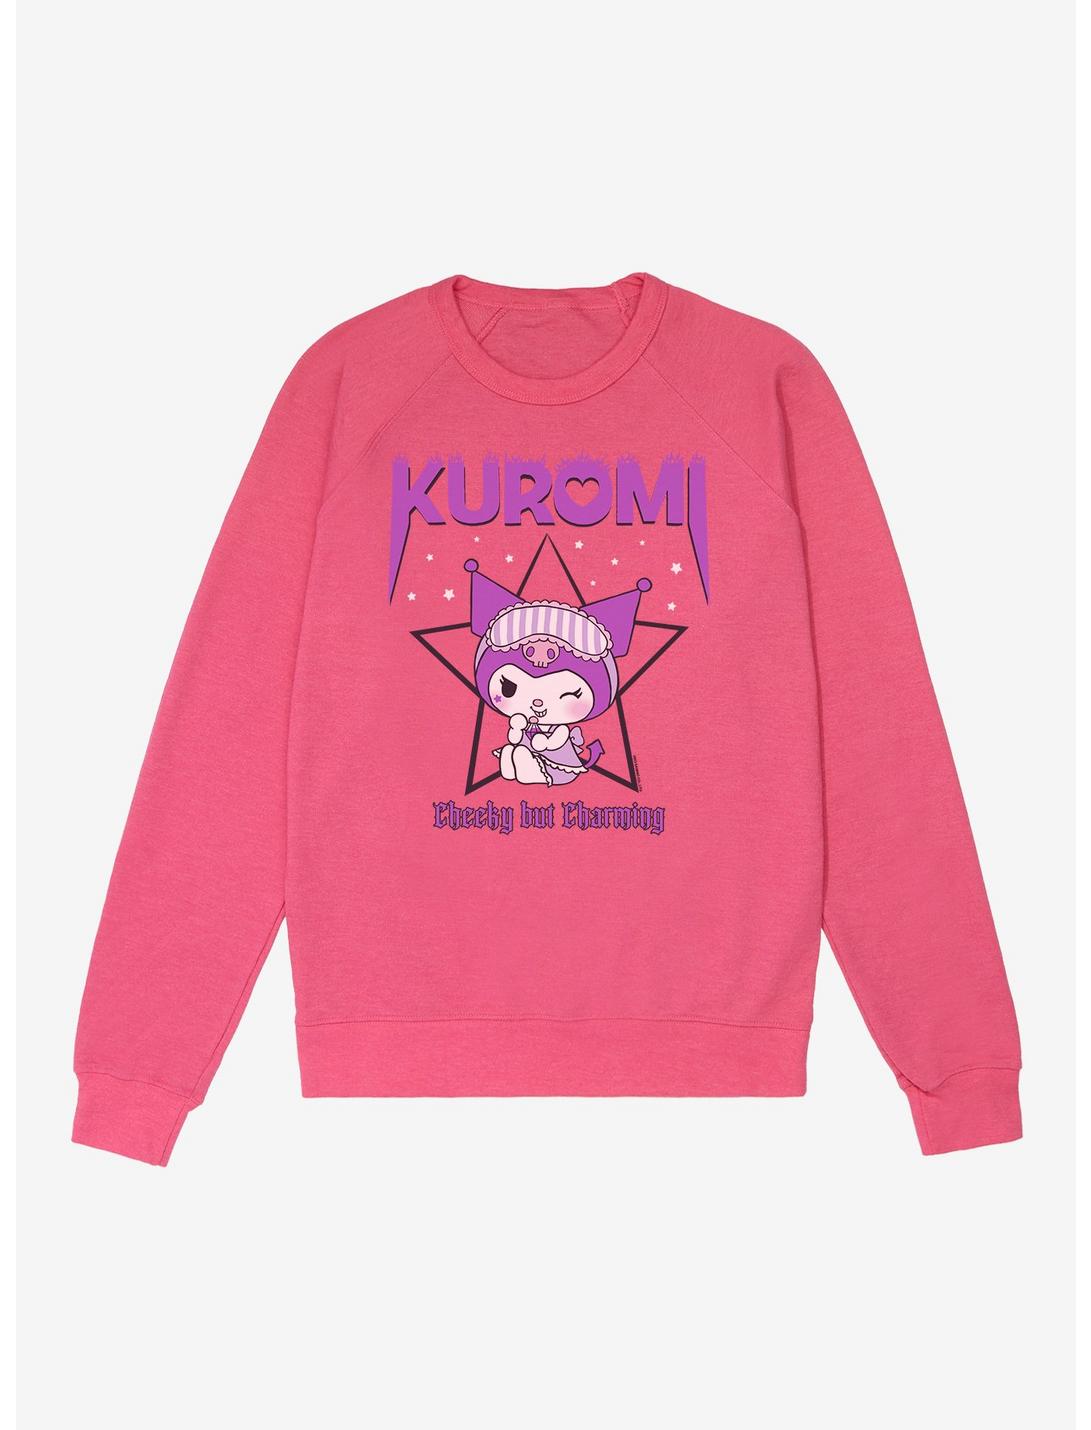 Kuromi  Cheeky But Charming French Terry Sweatshirt, HELICONIA HEATHER, hi-res